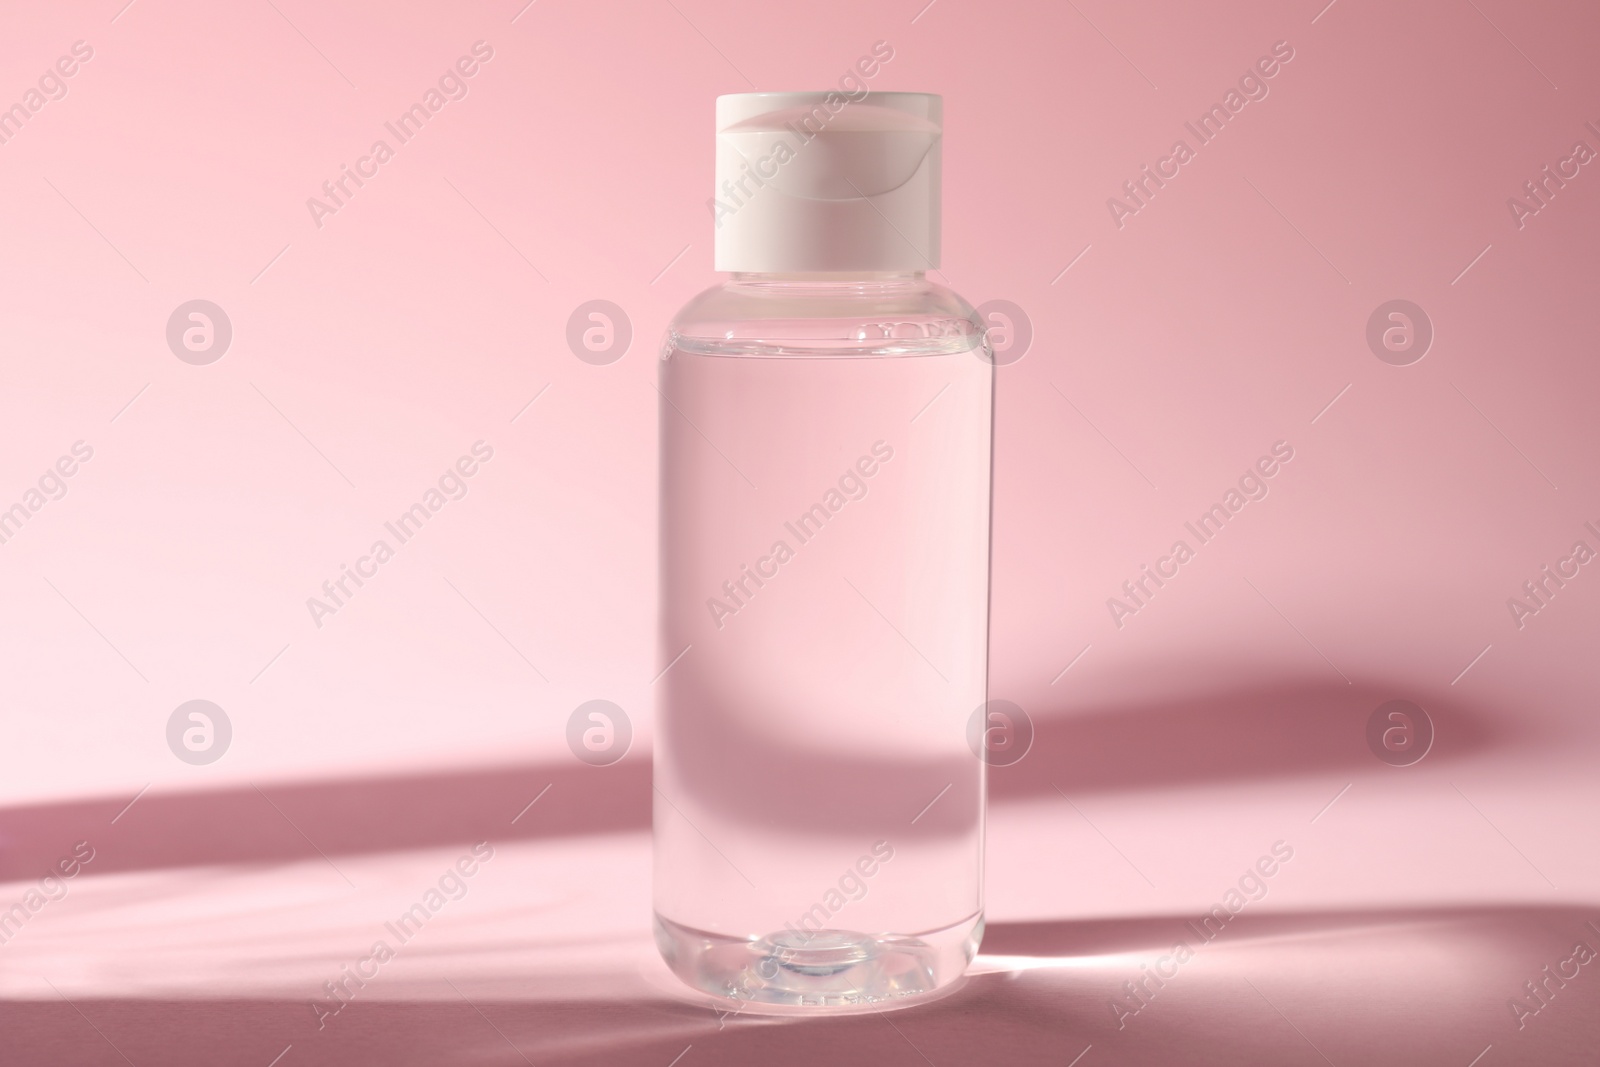 Photo of Bottle of micellar water on pink background